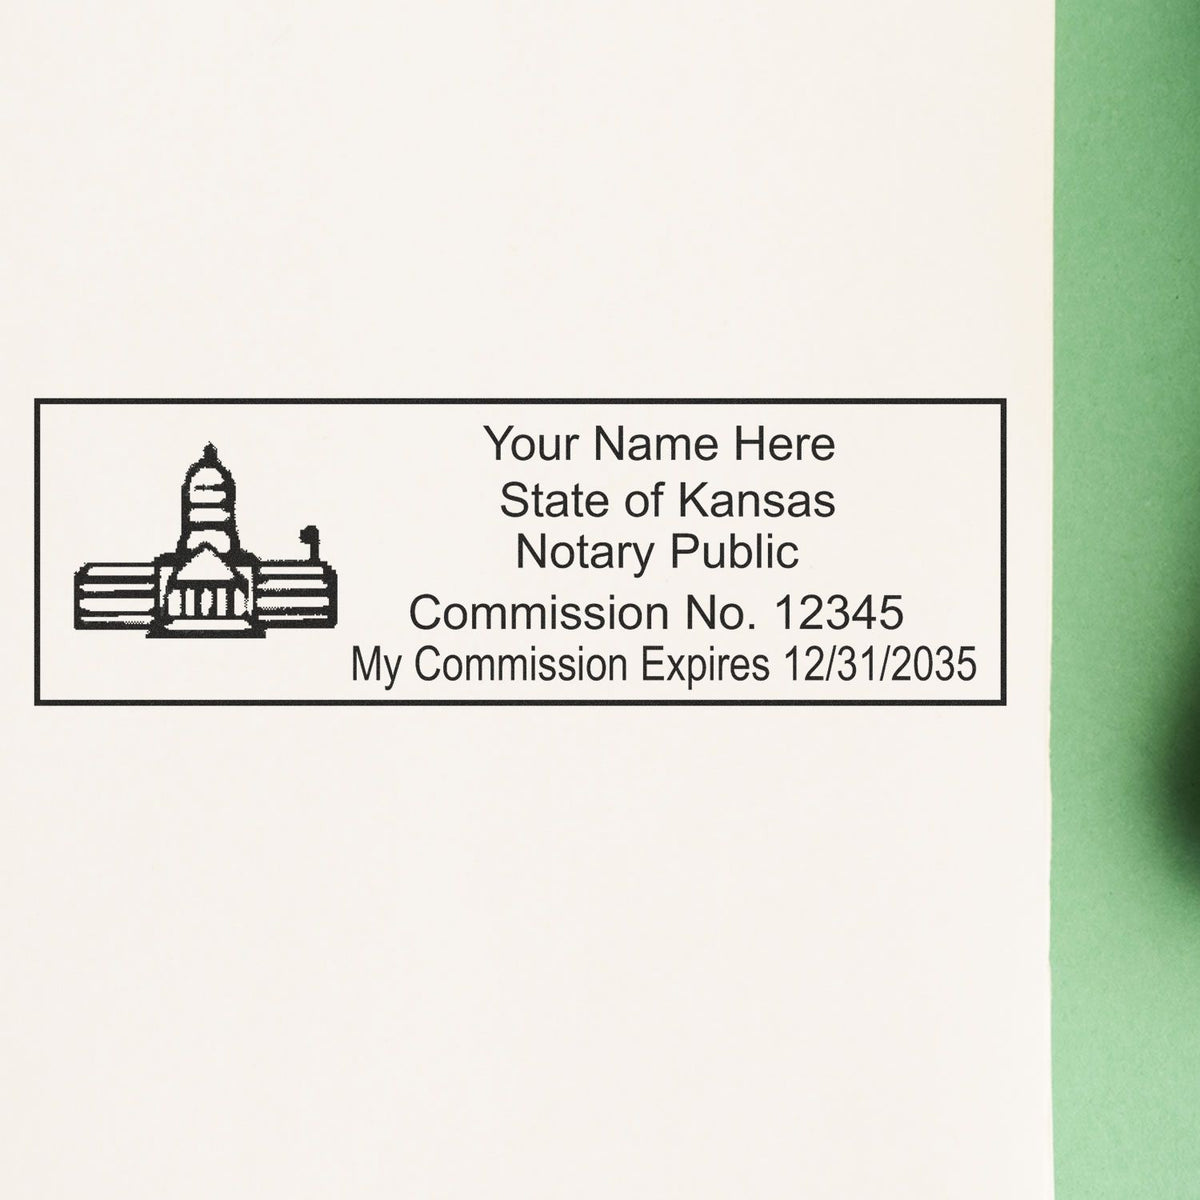 This paper is stamped with a sample imprint of the Super Slim Kansas Notary Public Stamp, signifying its quality and reliability.